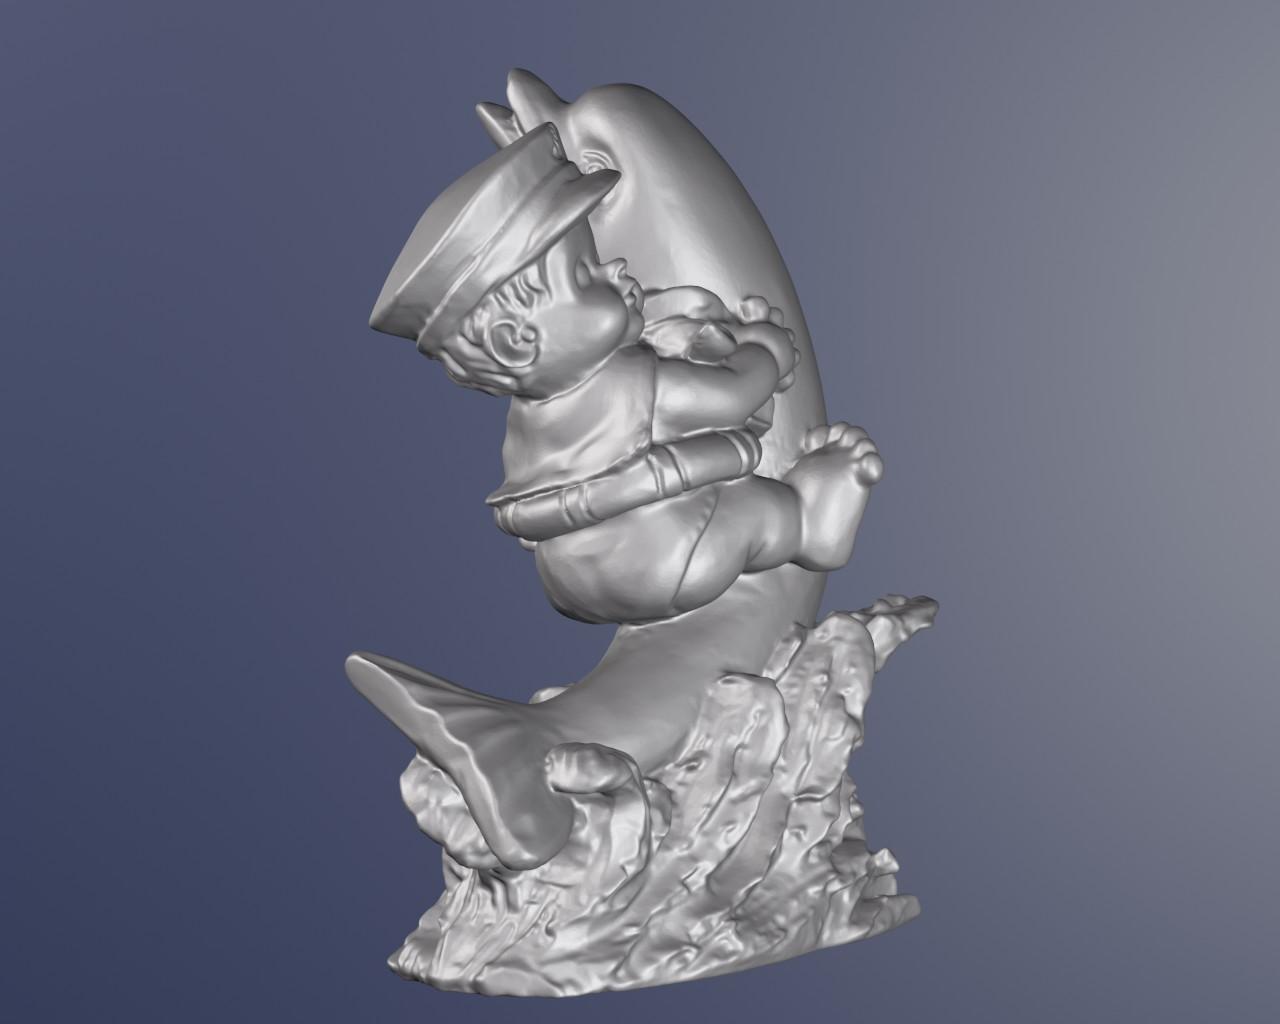 Dolphin and child sailor 3d model